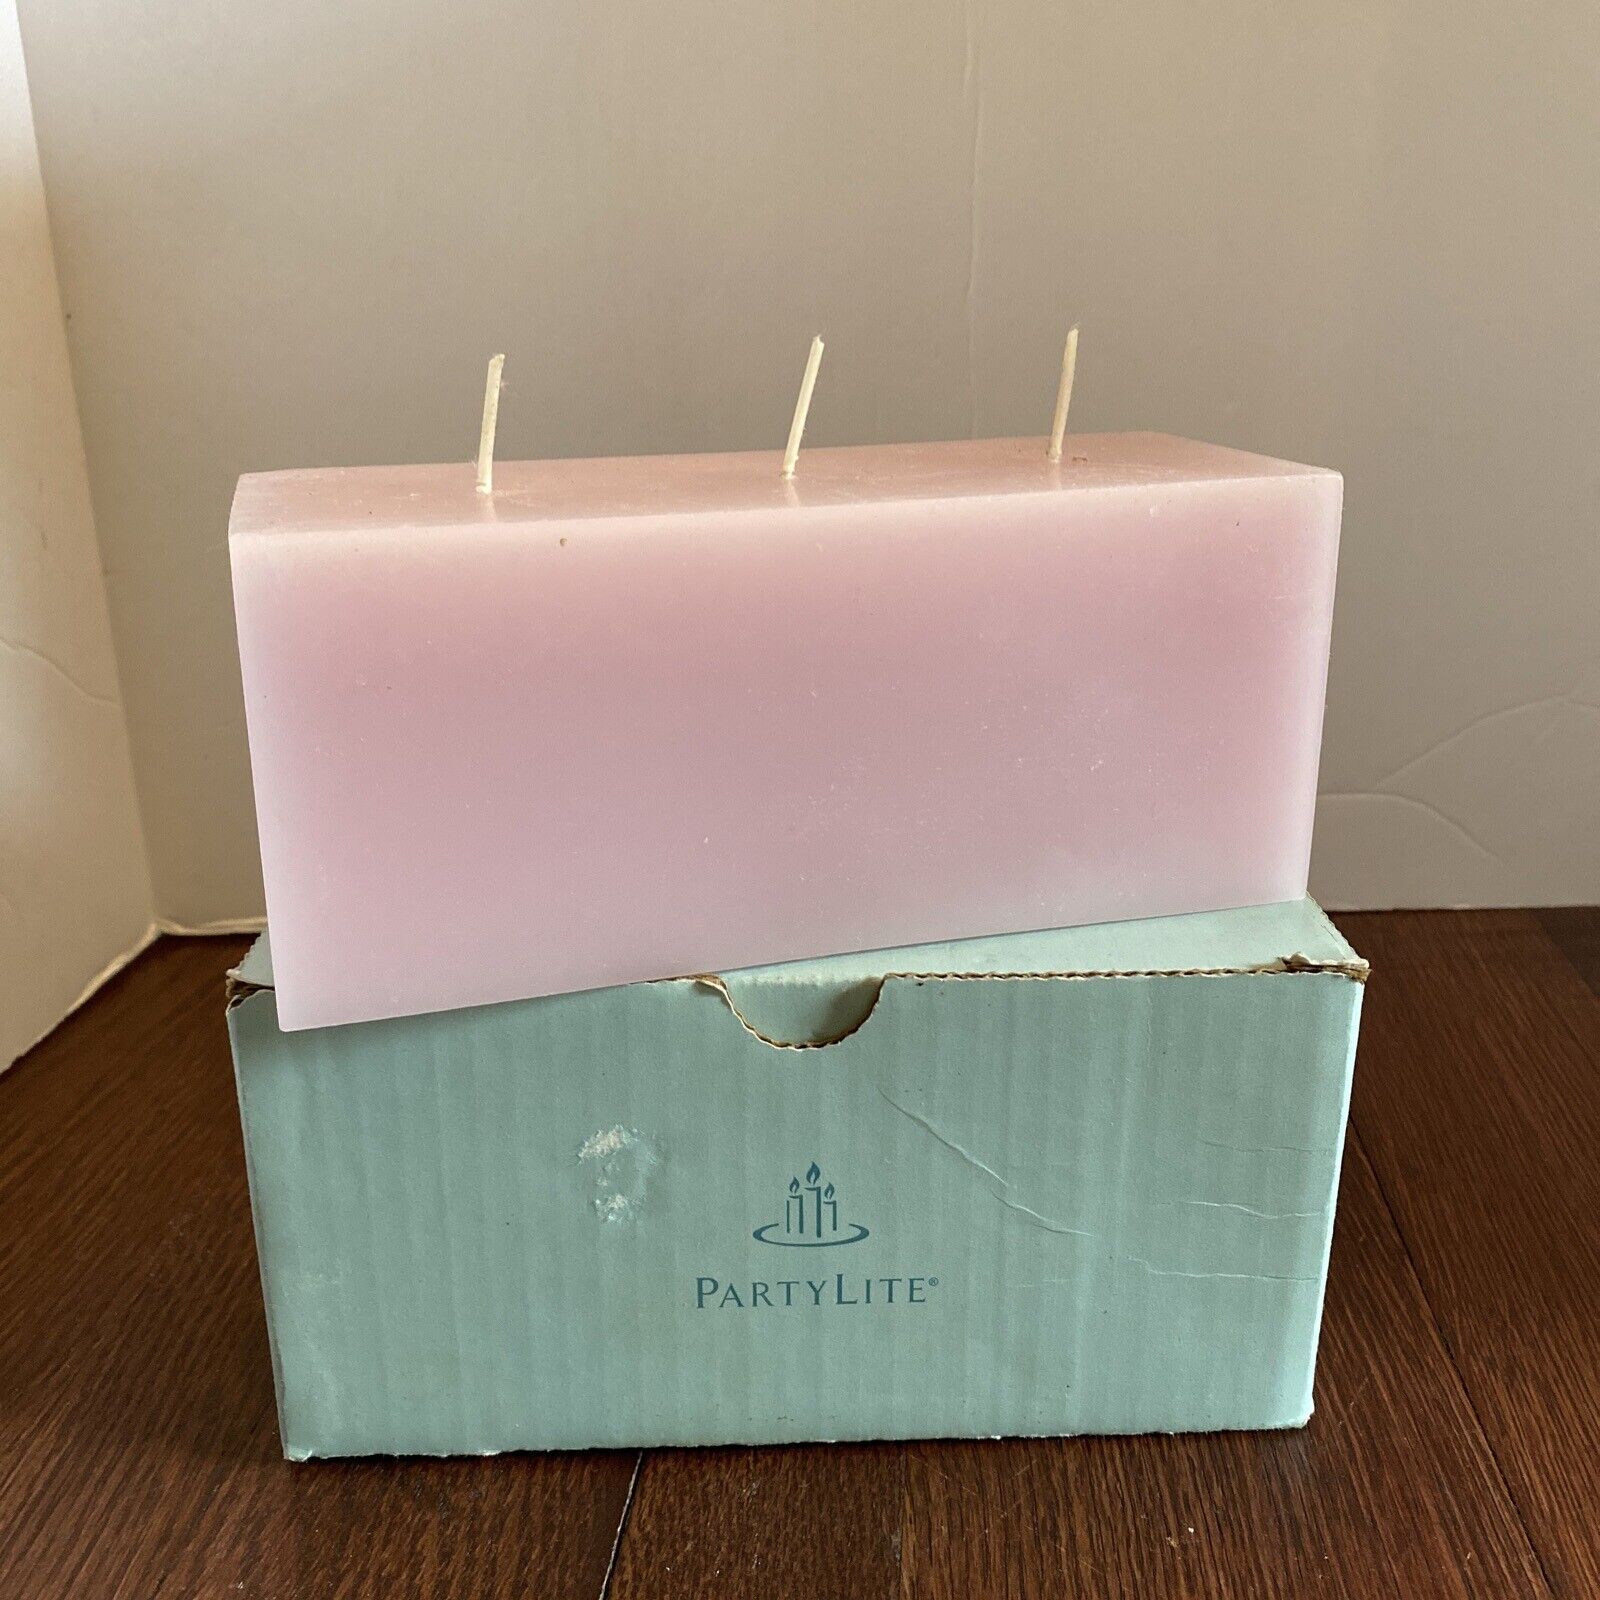 PartyLite STRAWBERRY RHUBARB 3-Wick Brick Candle K75272 New 7 x 3 Pink Retired